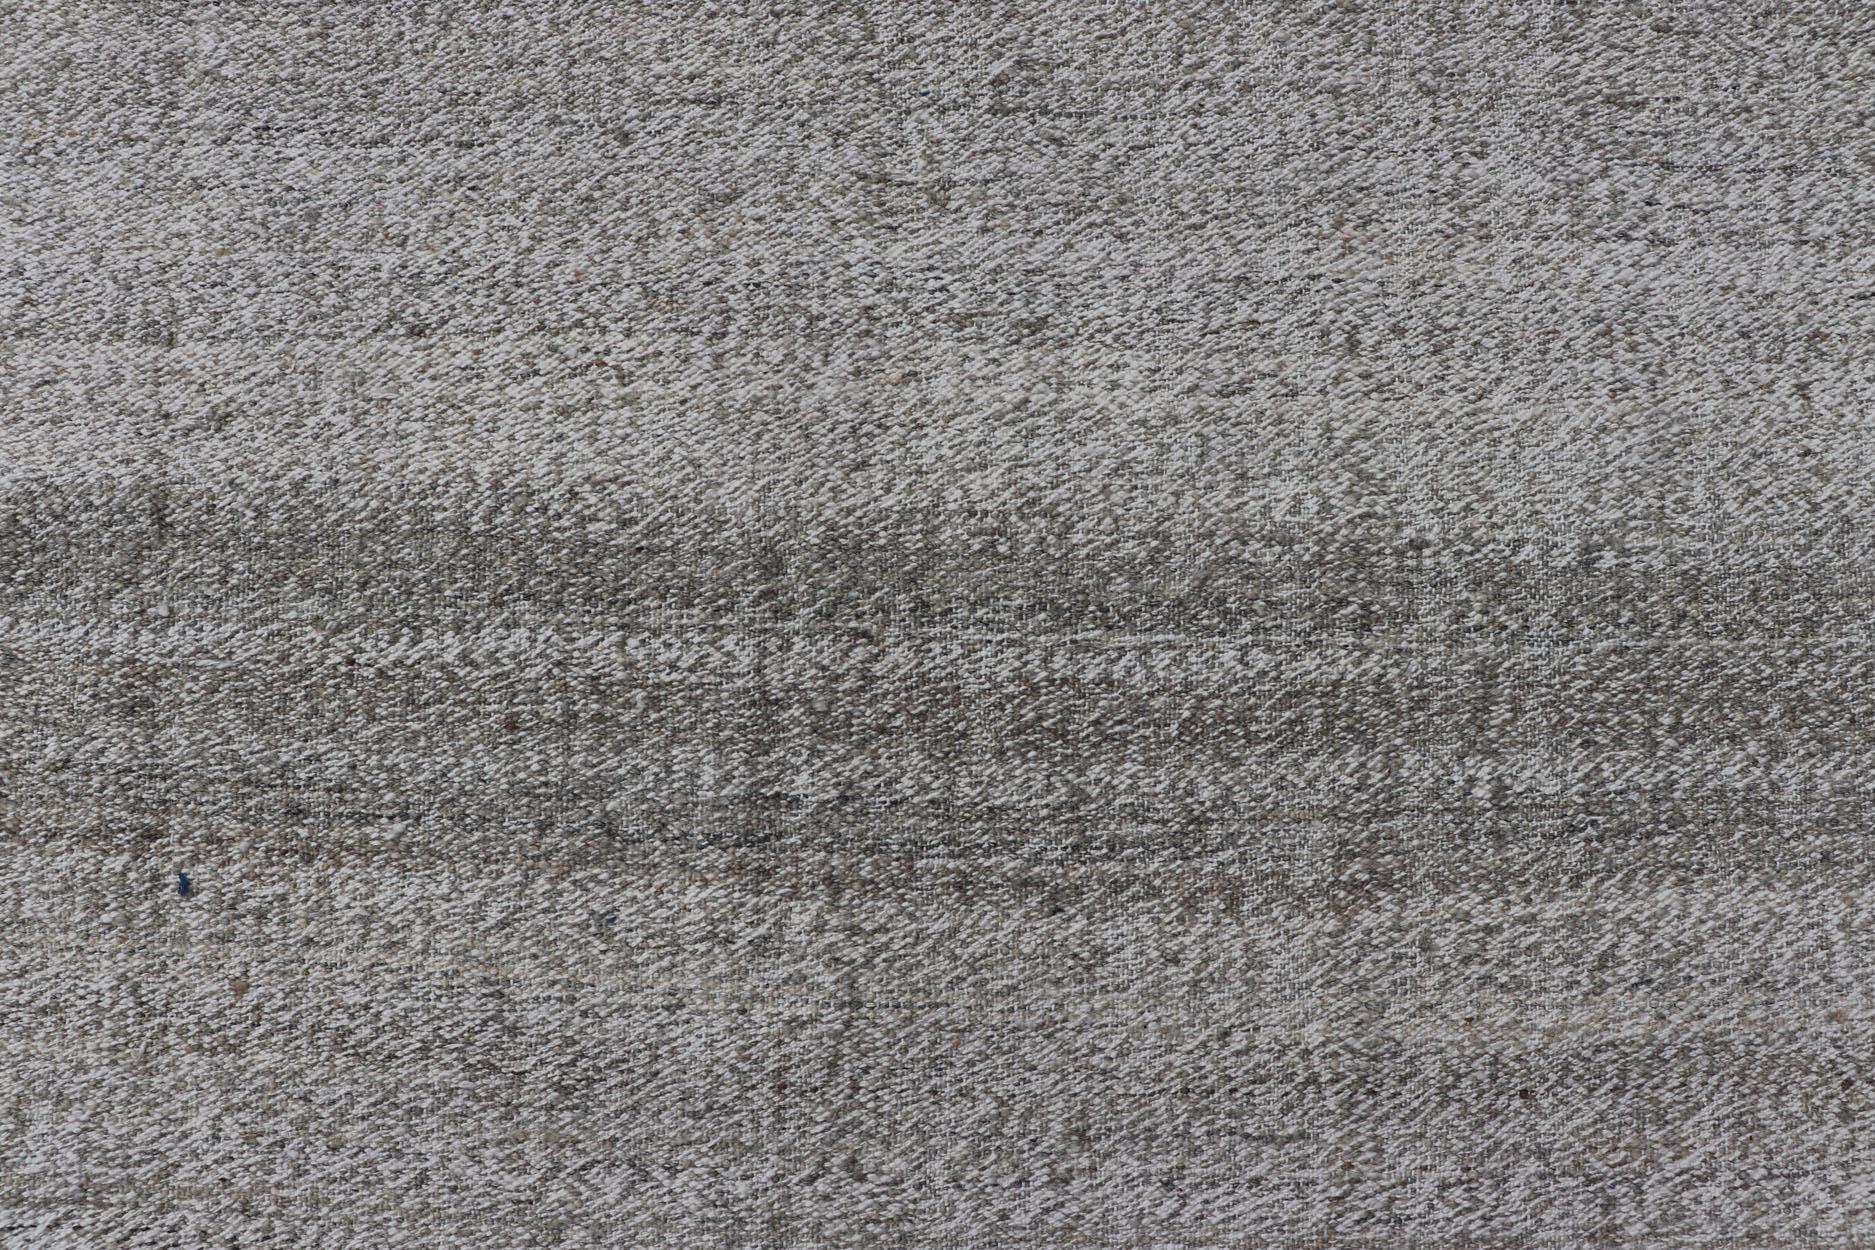  Modern Kilim Rug with Stripes in Neutral tones Shades of Gray  For Sale 3